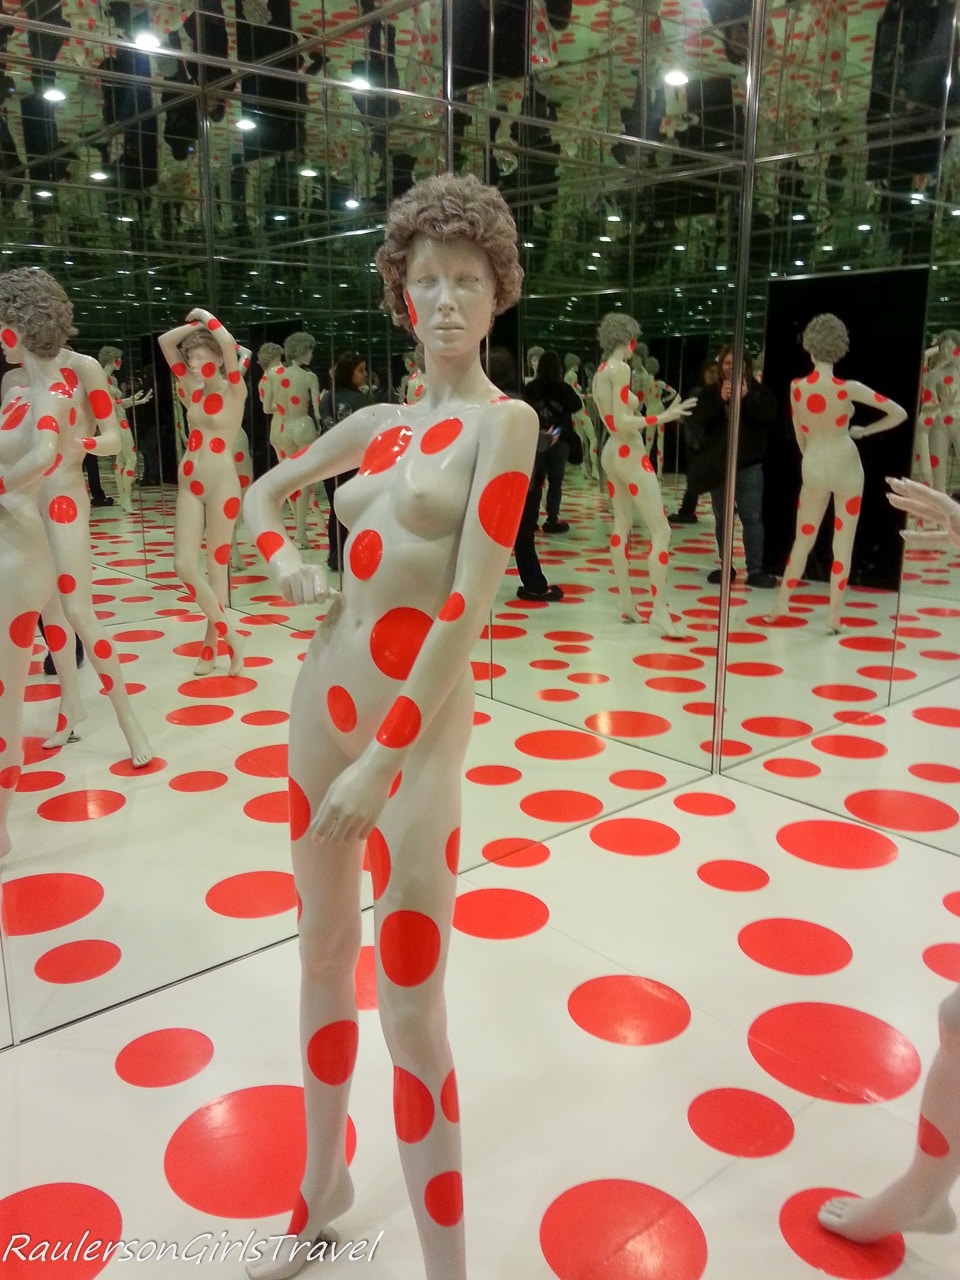 Repetitive Vision at the Mattress Factory